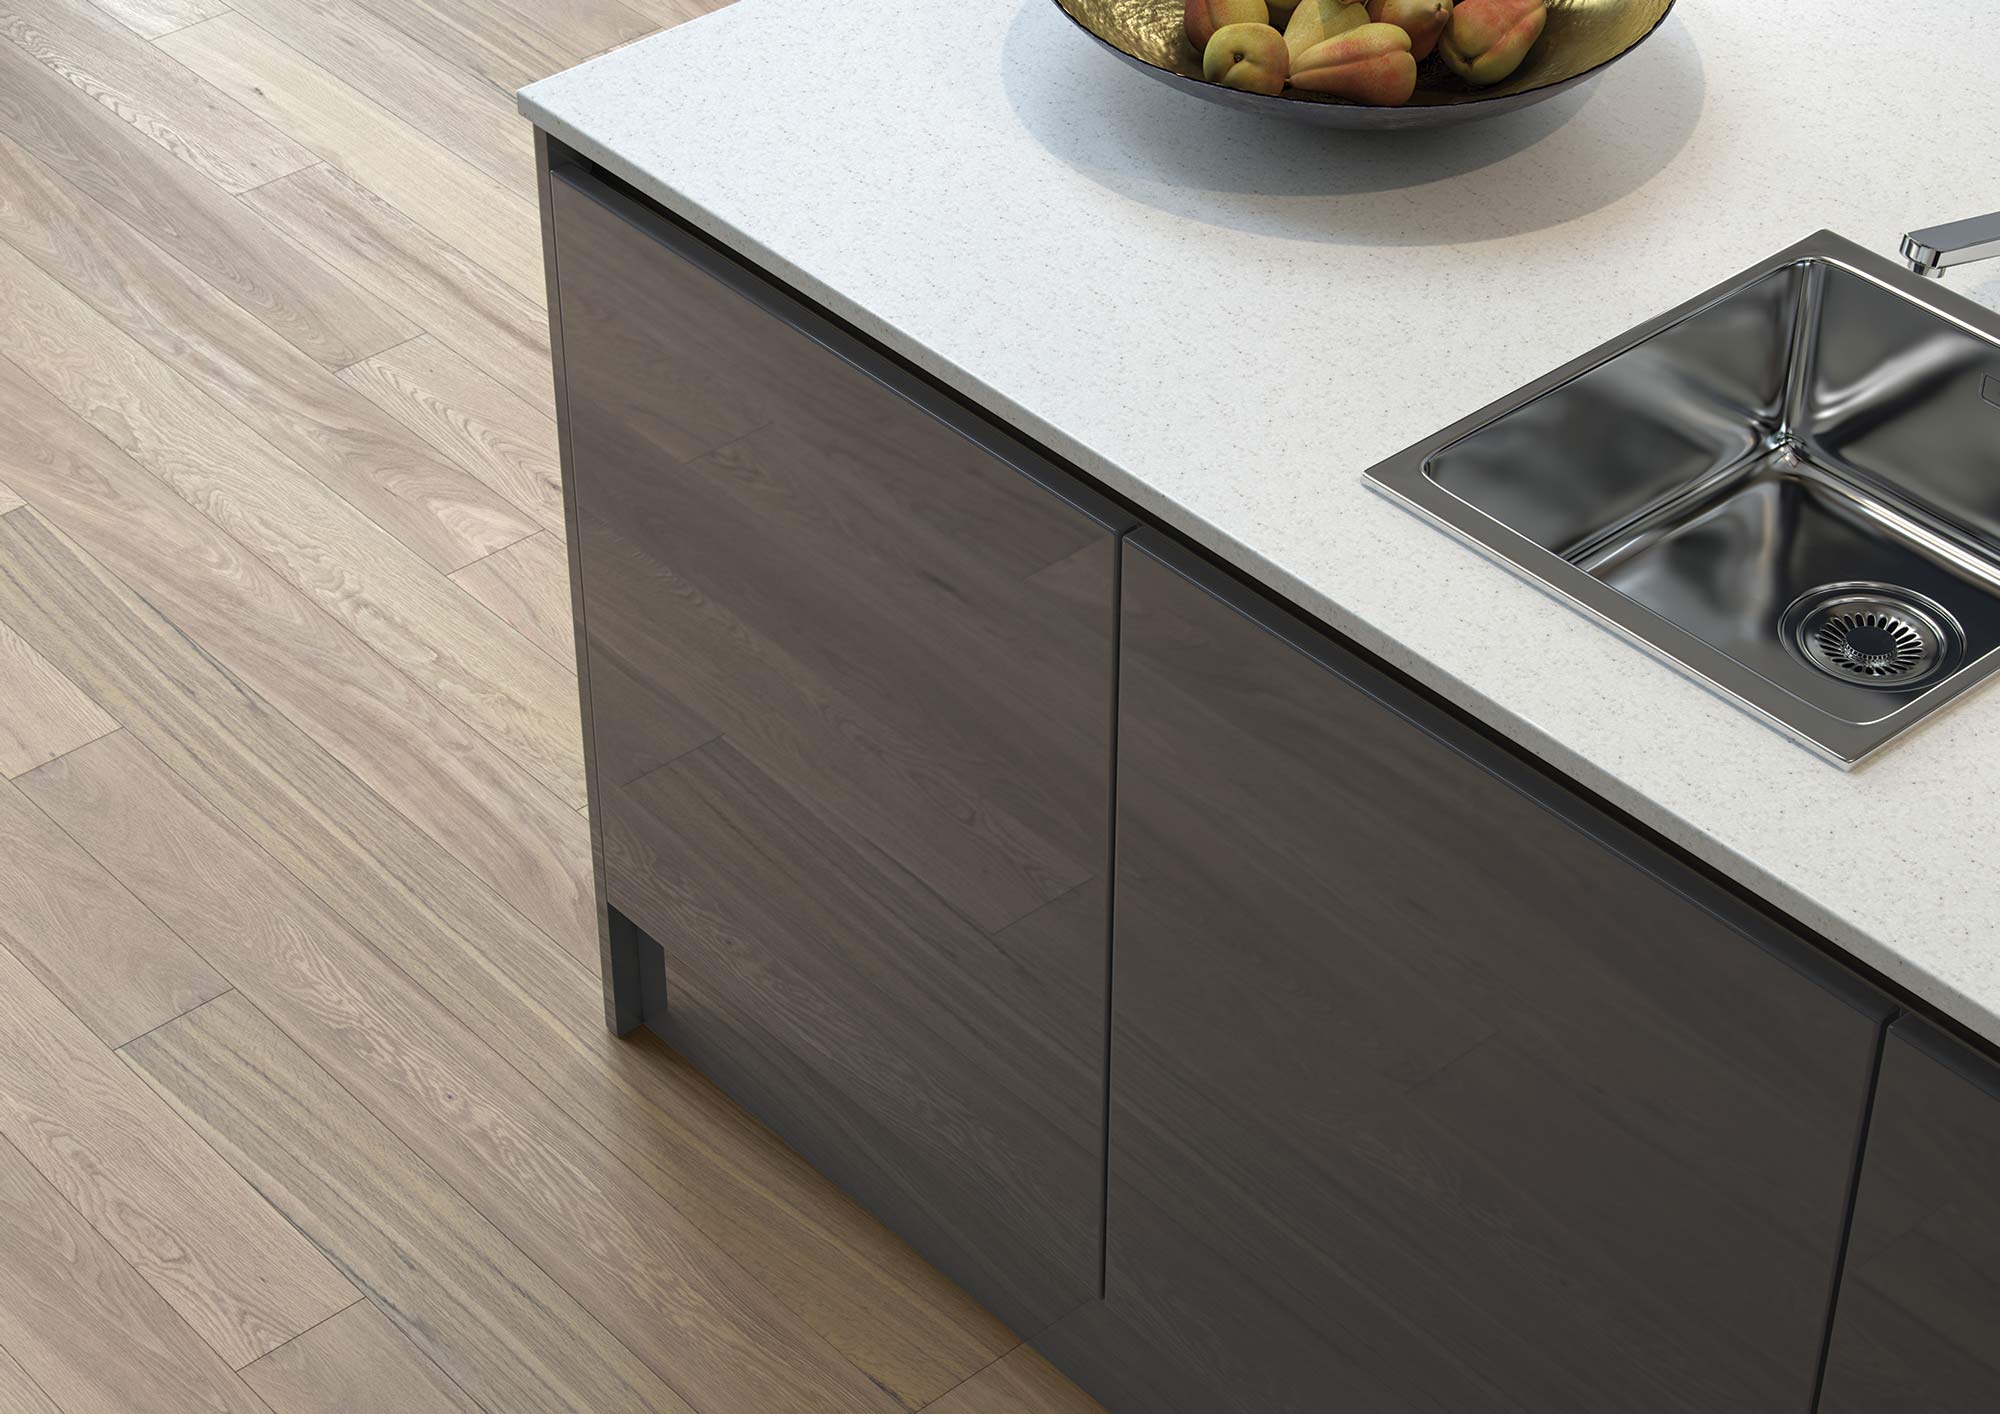 J-pull handleless gloss kitchen graphite and porcelain picture 4